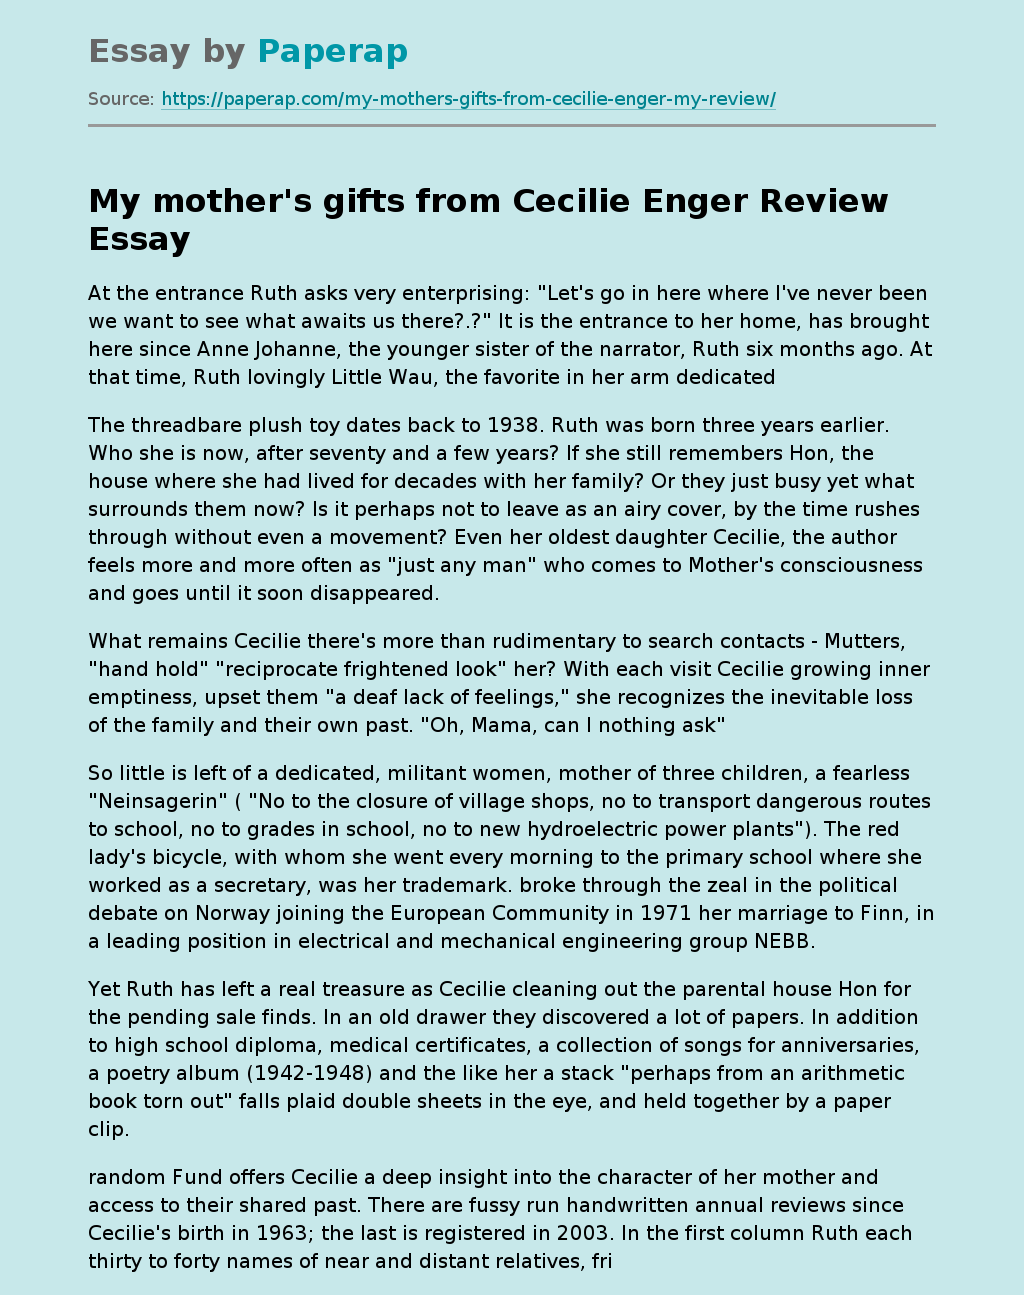 My mother's gifts from Cecilie Enger Review